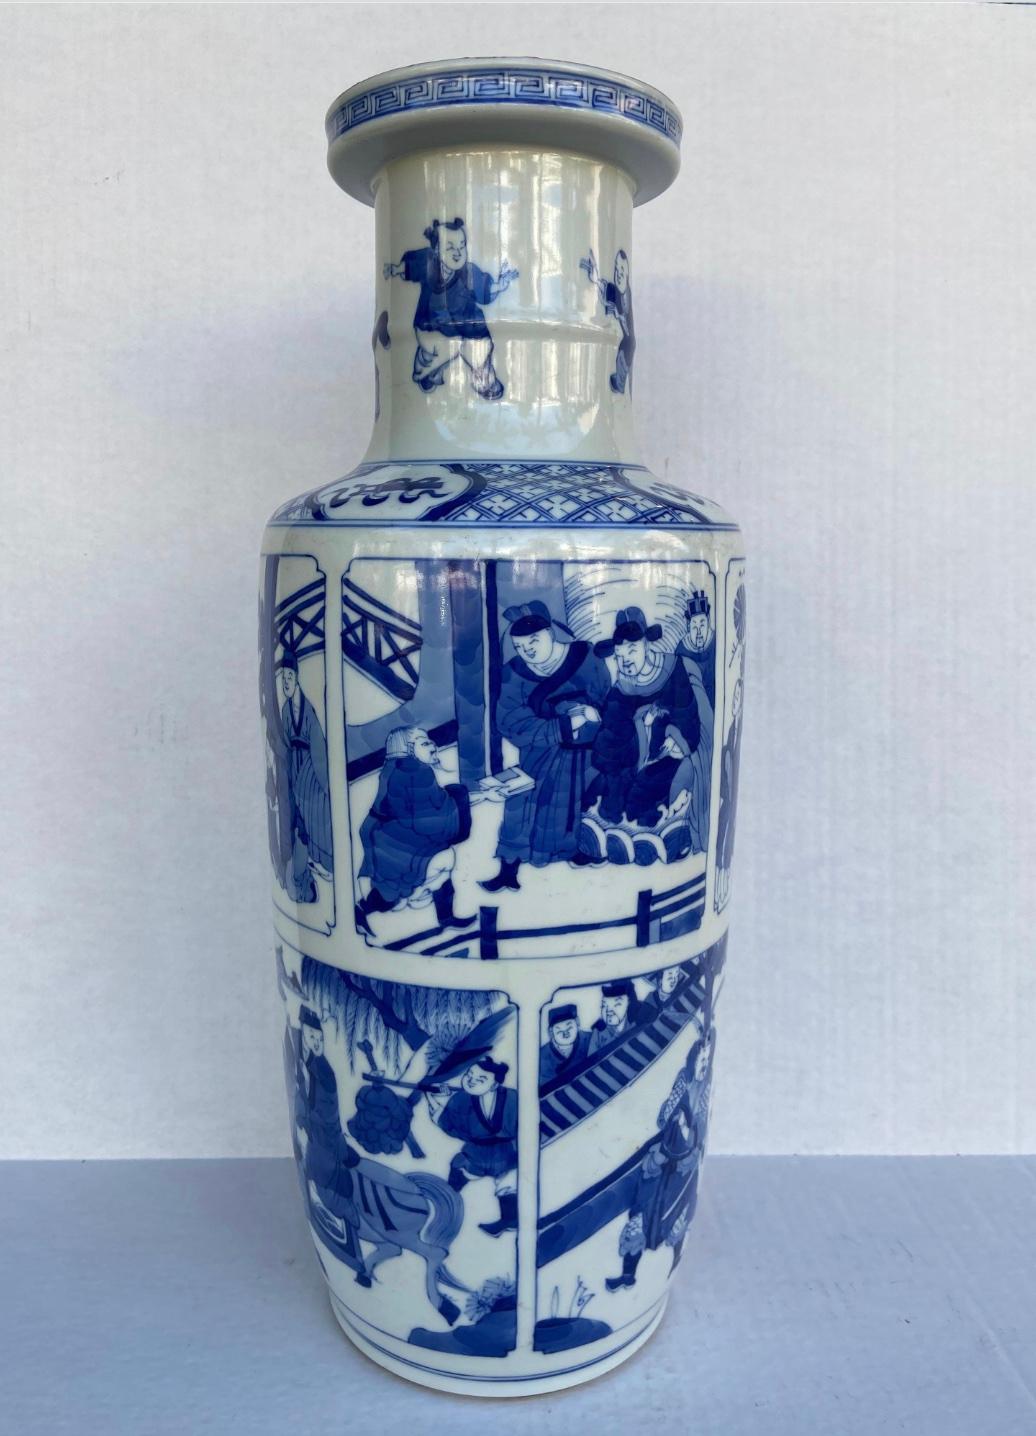 Chinese Export This Pair of Blue and White Porcelain Vases, Circa 1850 Qing Dynasty